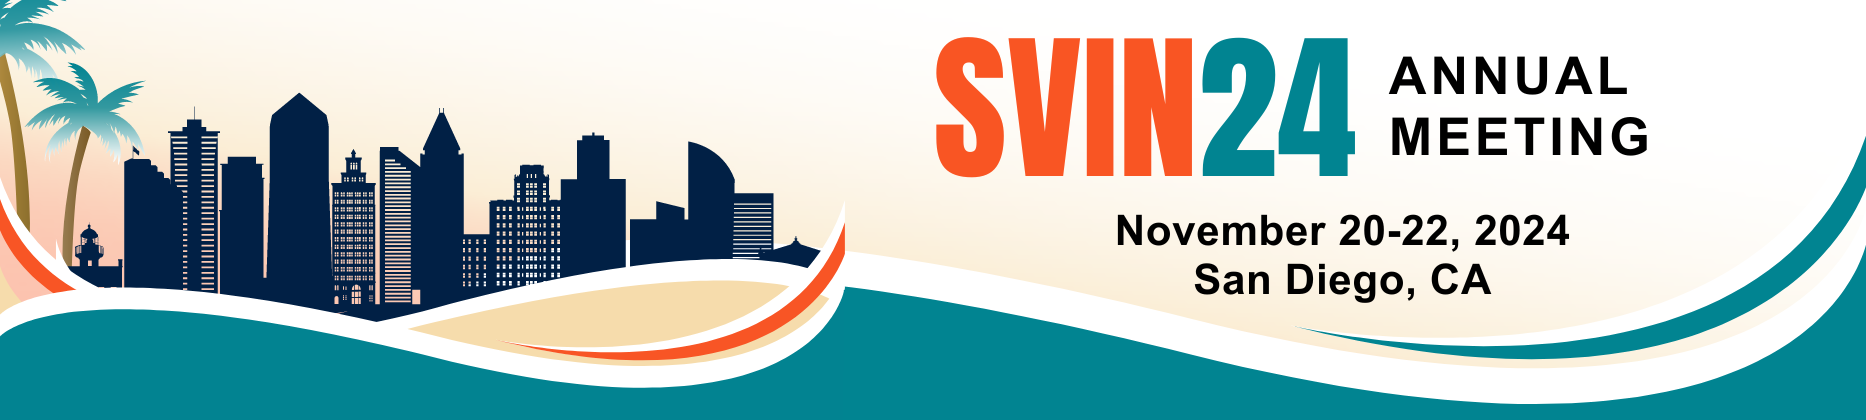 Join Us Next Year in San Diego - SVIN24 Annual Meeting - November 20-23, 2024